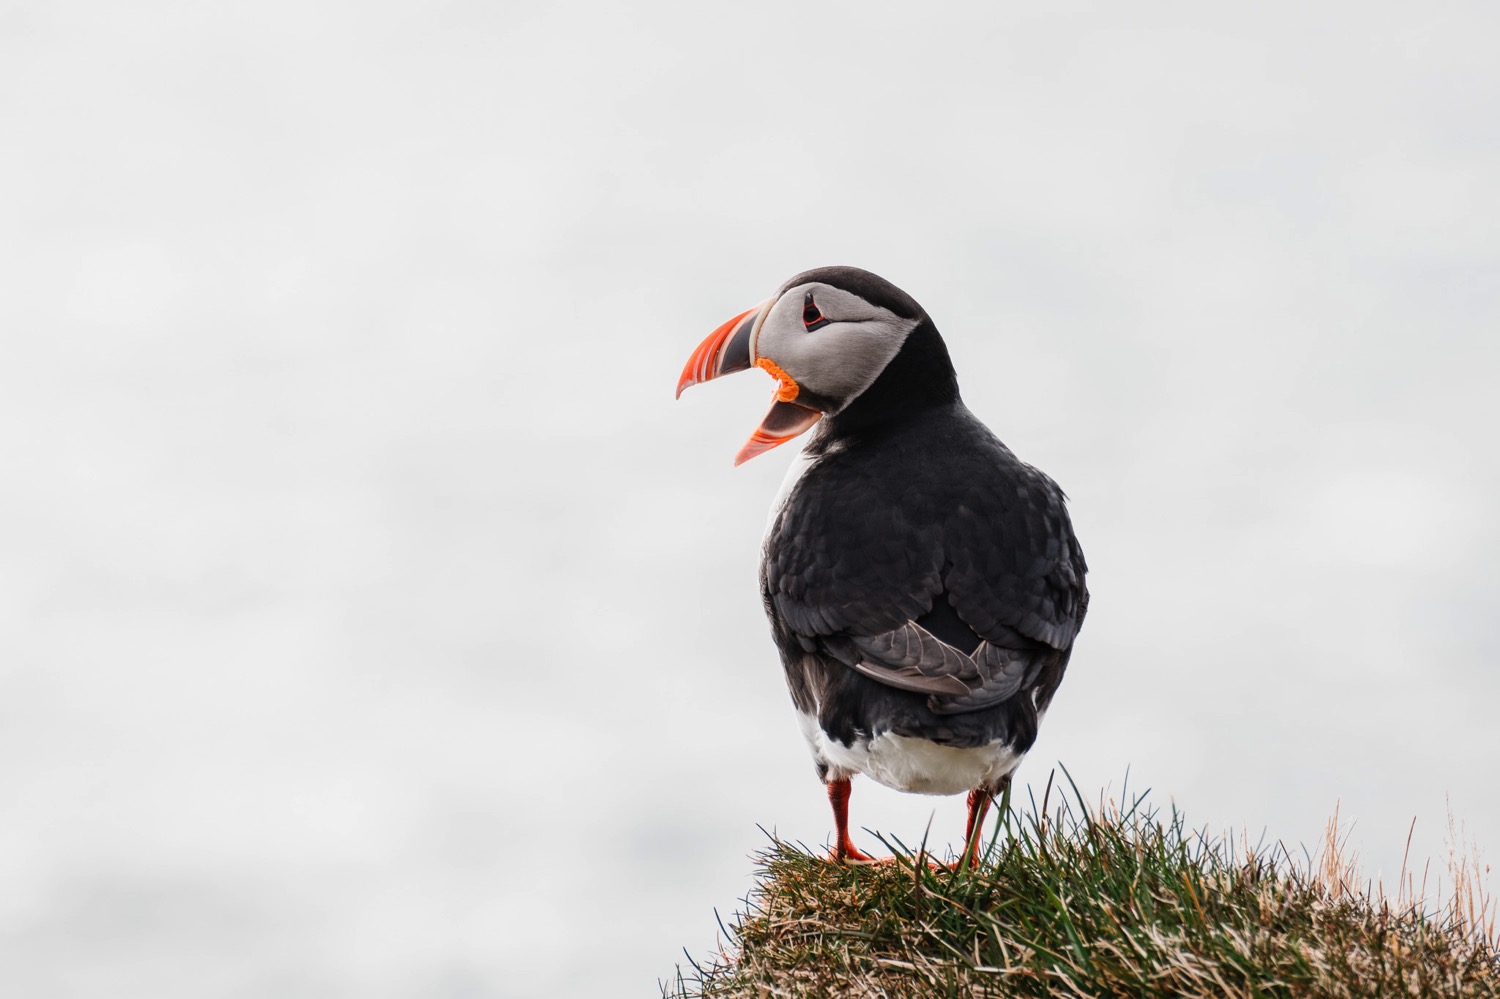  A Puffin - Iceland Blog Part II

Photo by Trung Hoang Photography |www.trunghoangphotography.com | San Francisco Bay Area Wedding Photographer 